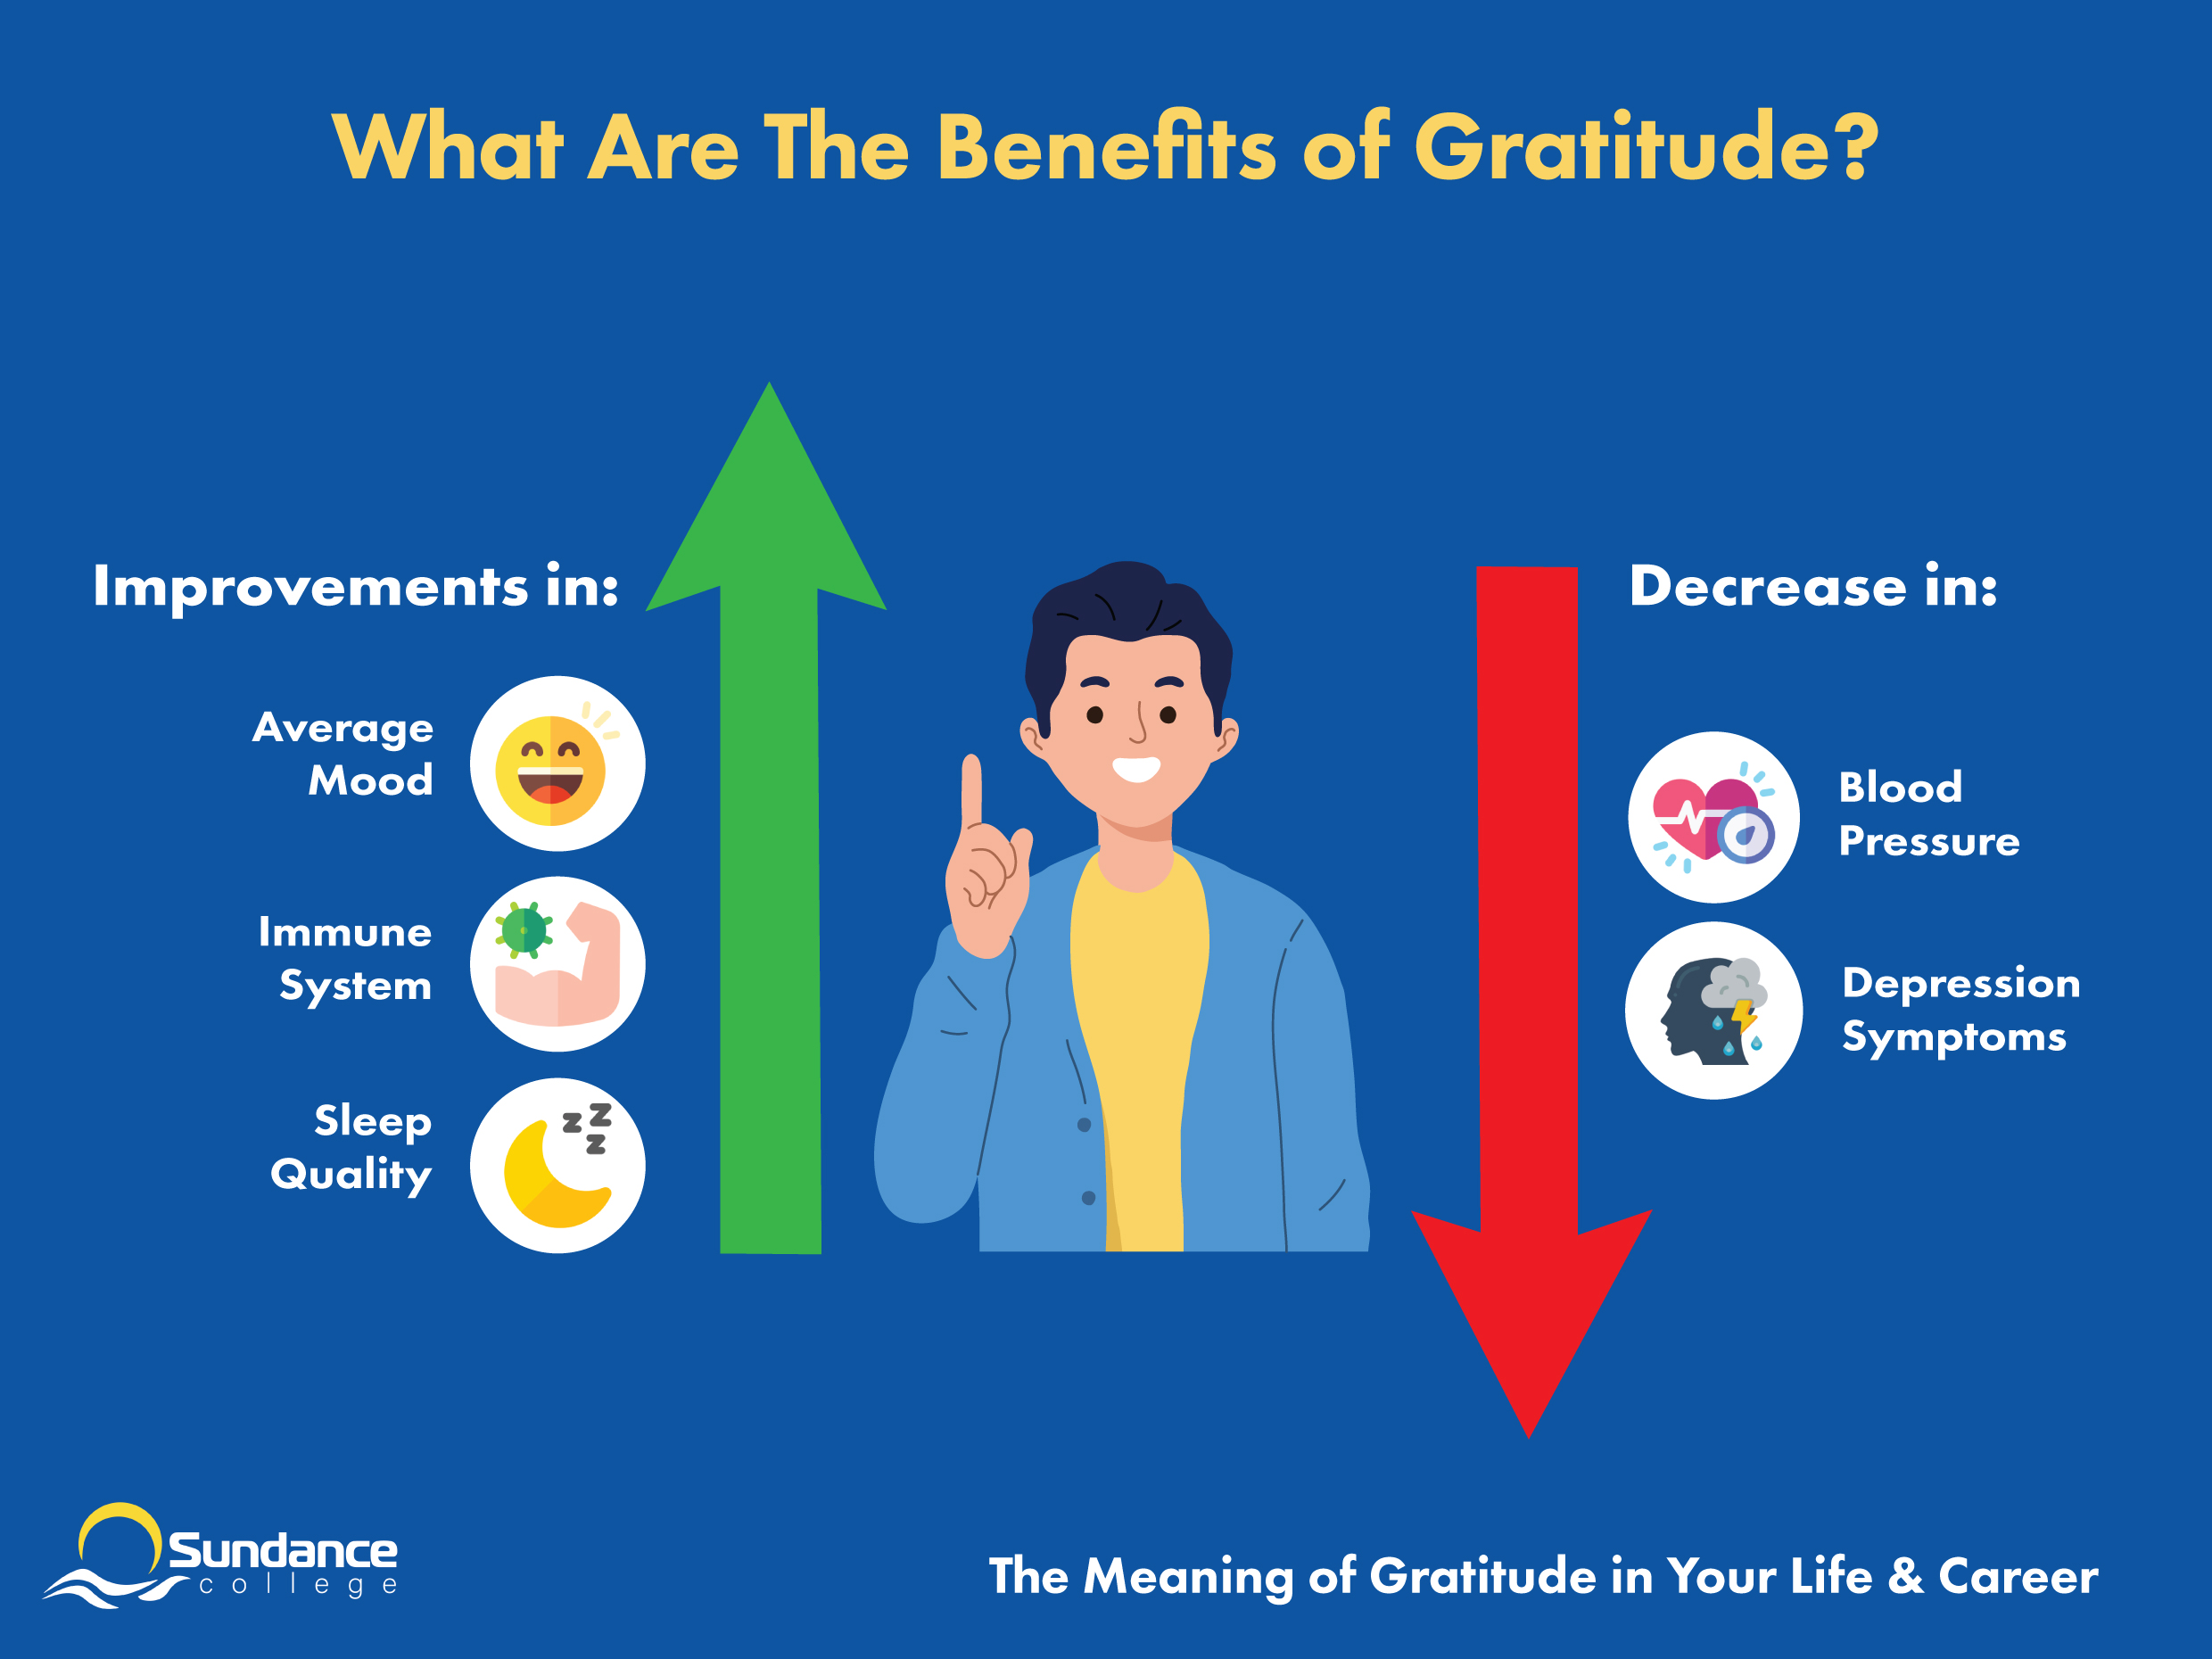 Infographic stating the benefits of gratitude, including improvements in mood, immune system, sleep - and decreases in blood pressure, and symptoms of depression